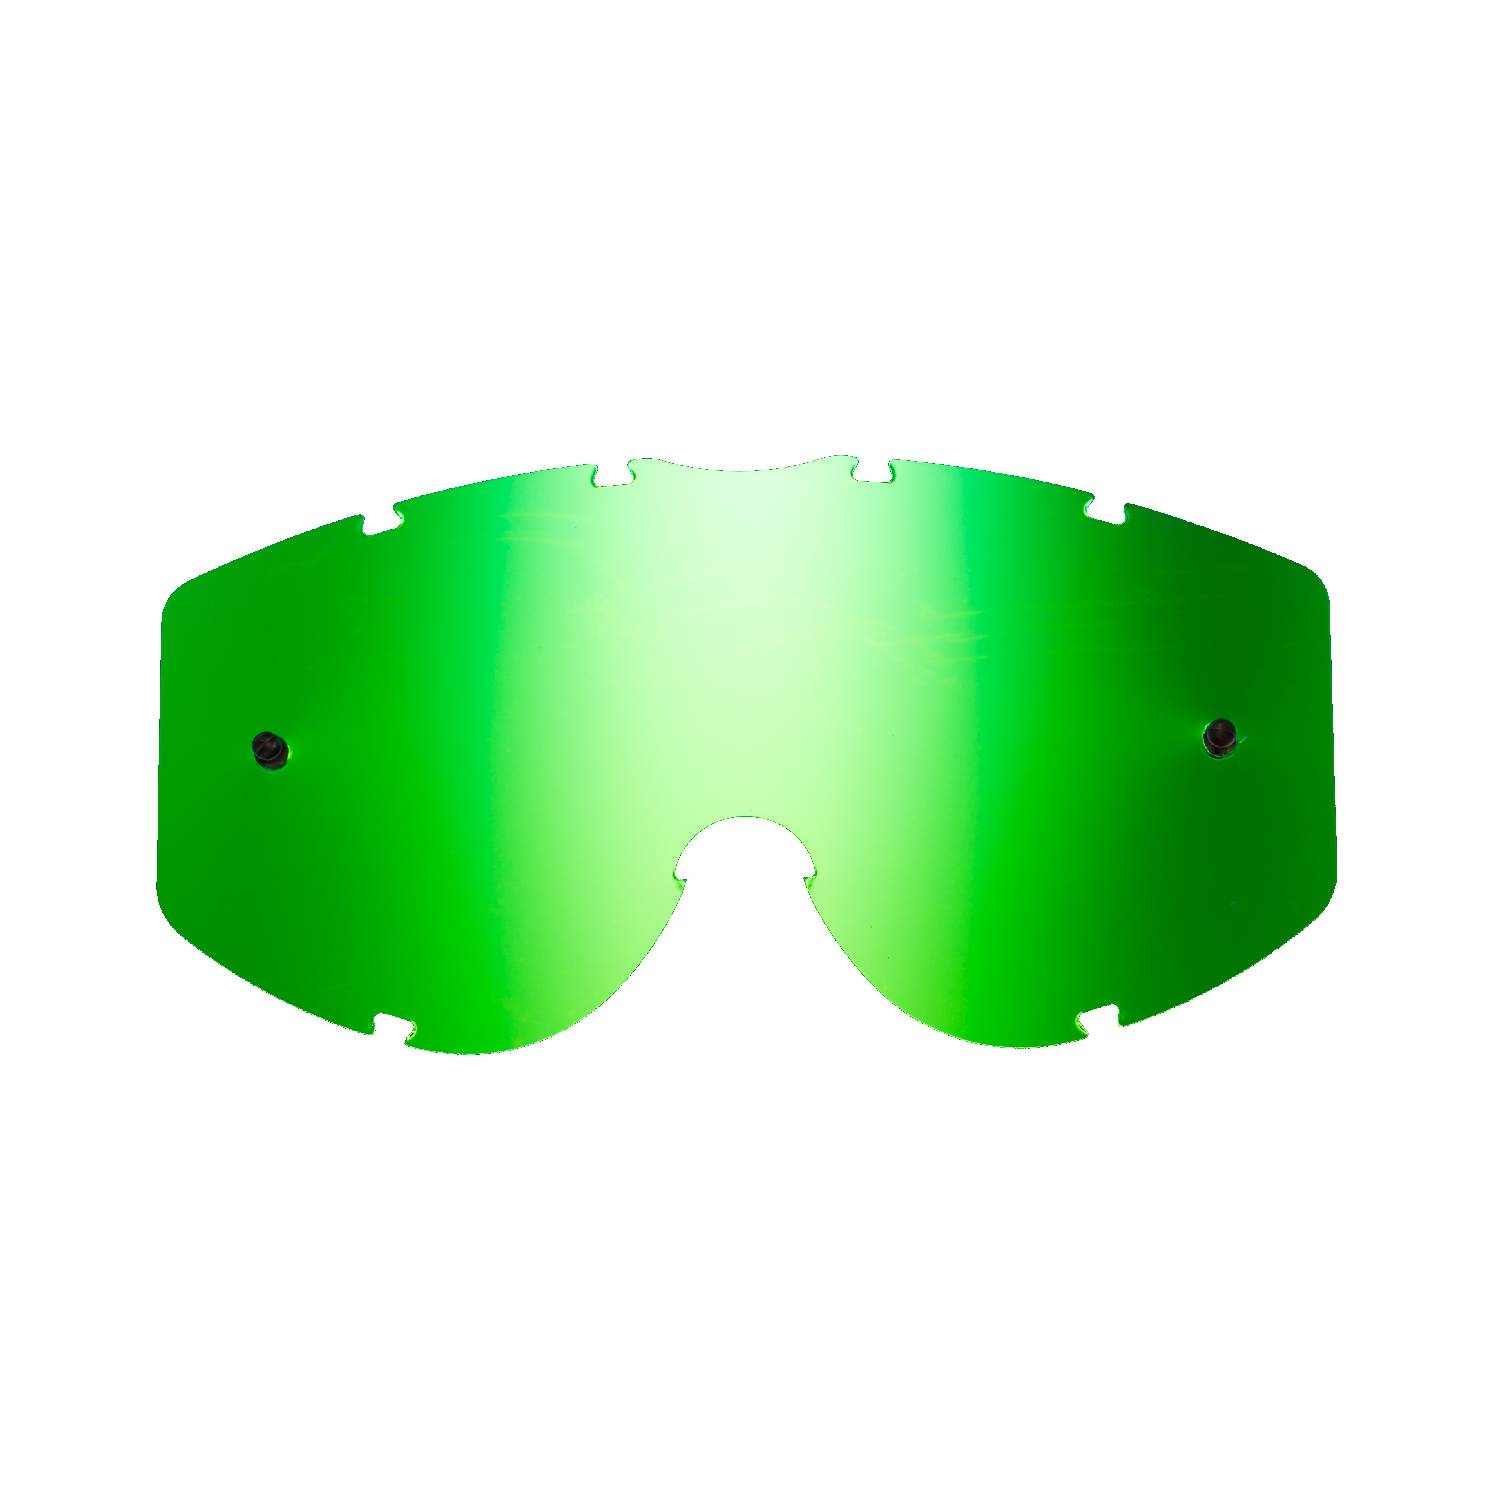 green-toned mirrored replacement lenses for goggles compatible for Progrip 3200 / 3450 / 3400  / 3201 / 3204 / 3301 goggle